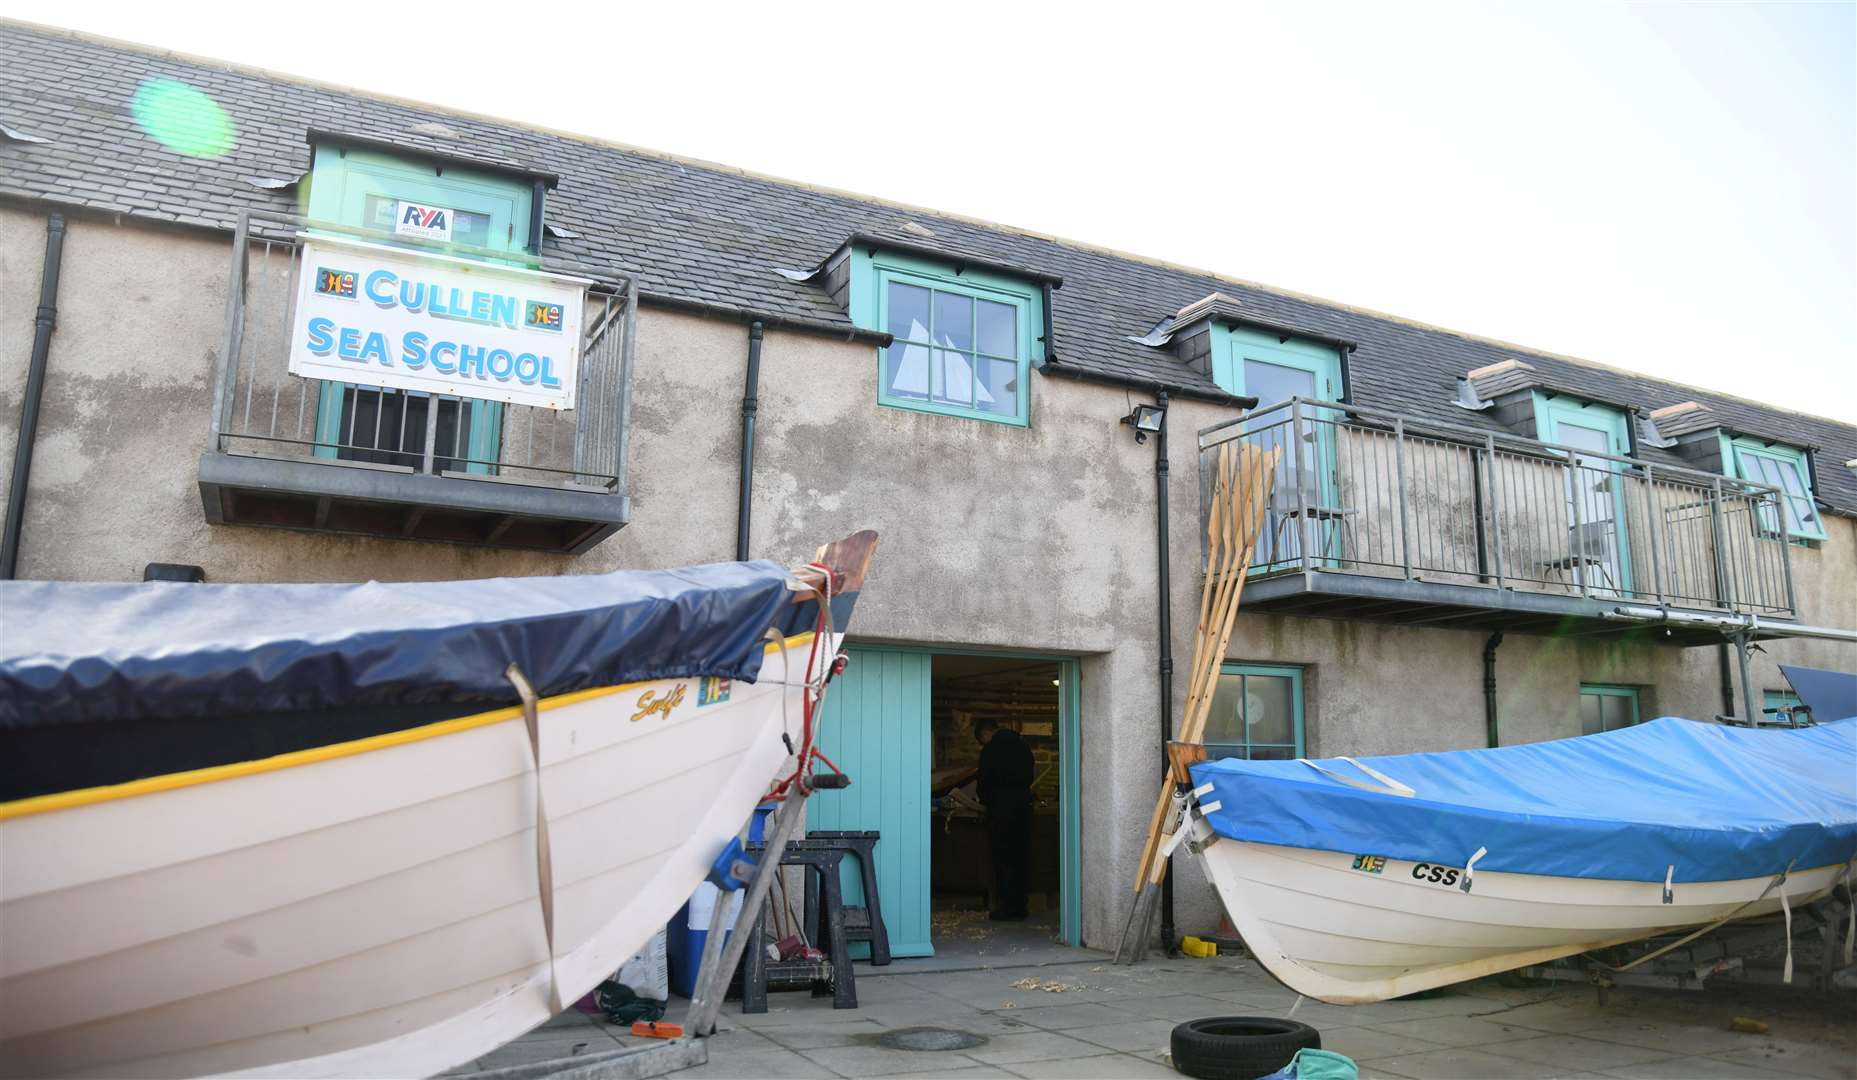 Cullen Sea School is one of the participants in the Great Days Out scheme. Picture: Becky Saunderson